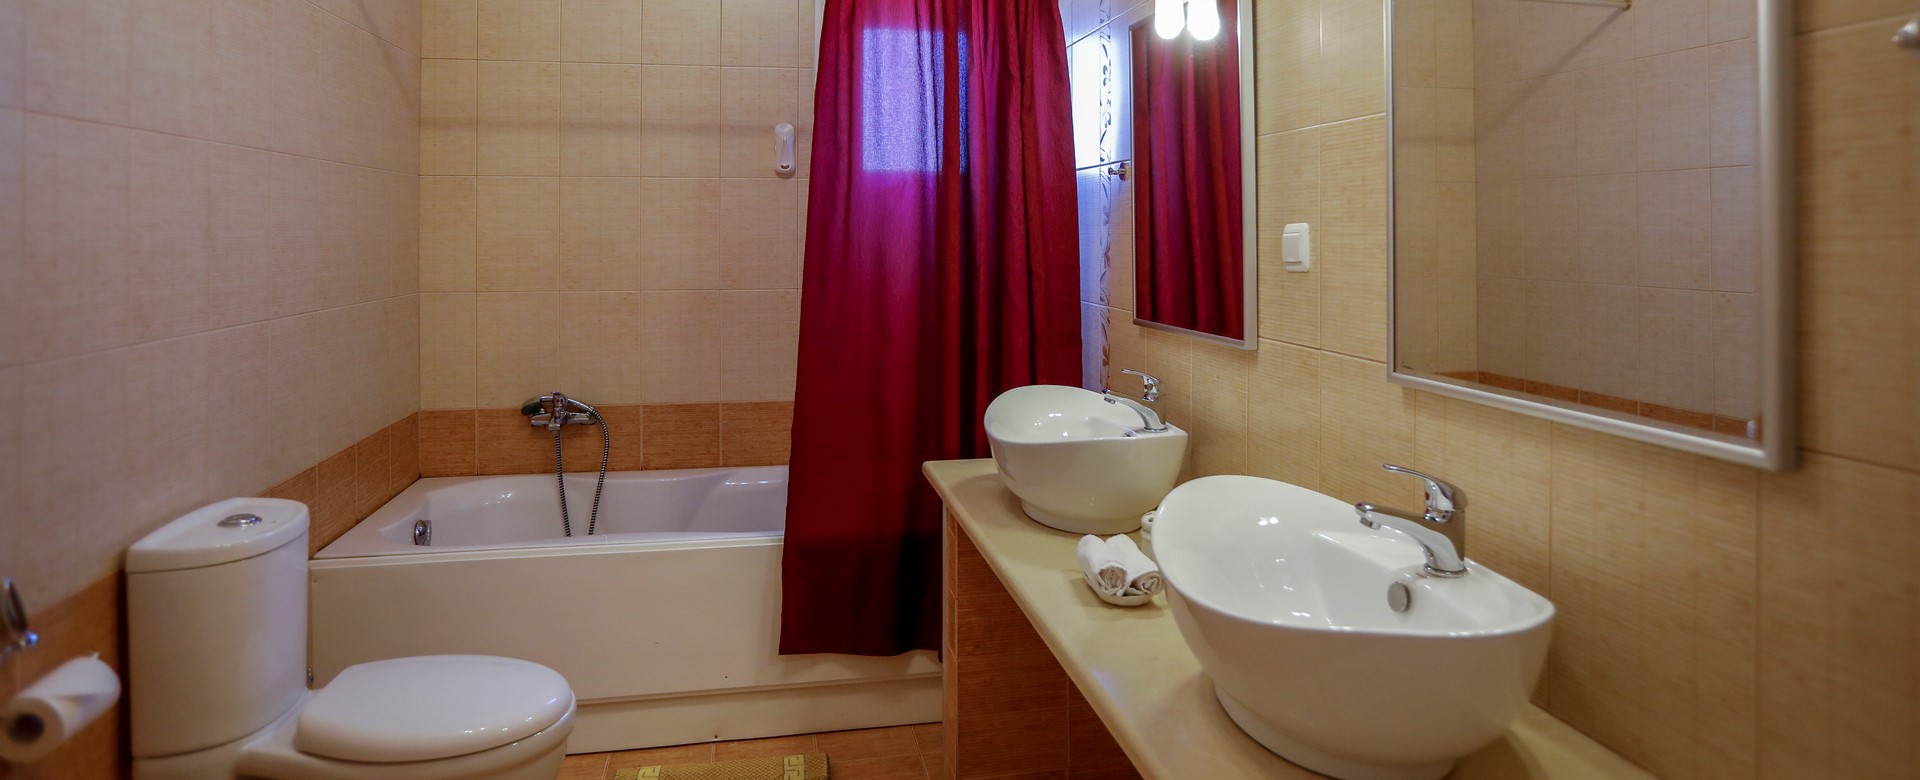 Bathroom with shower over bath and 'his & hers' sinks at Rosie's Herb Cottage, Assos, Kefalonia, Greek Islands